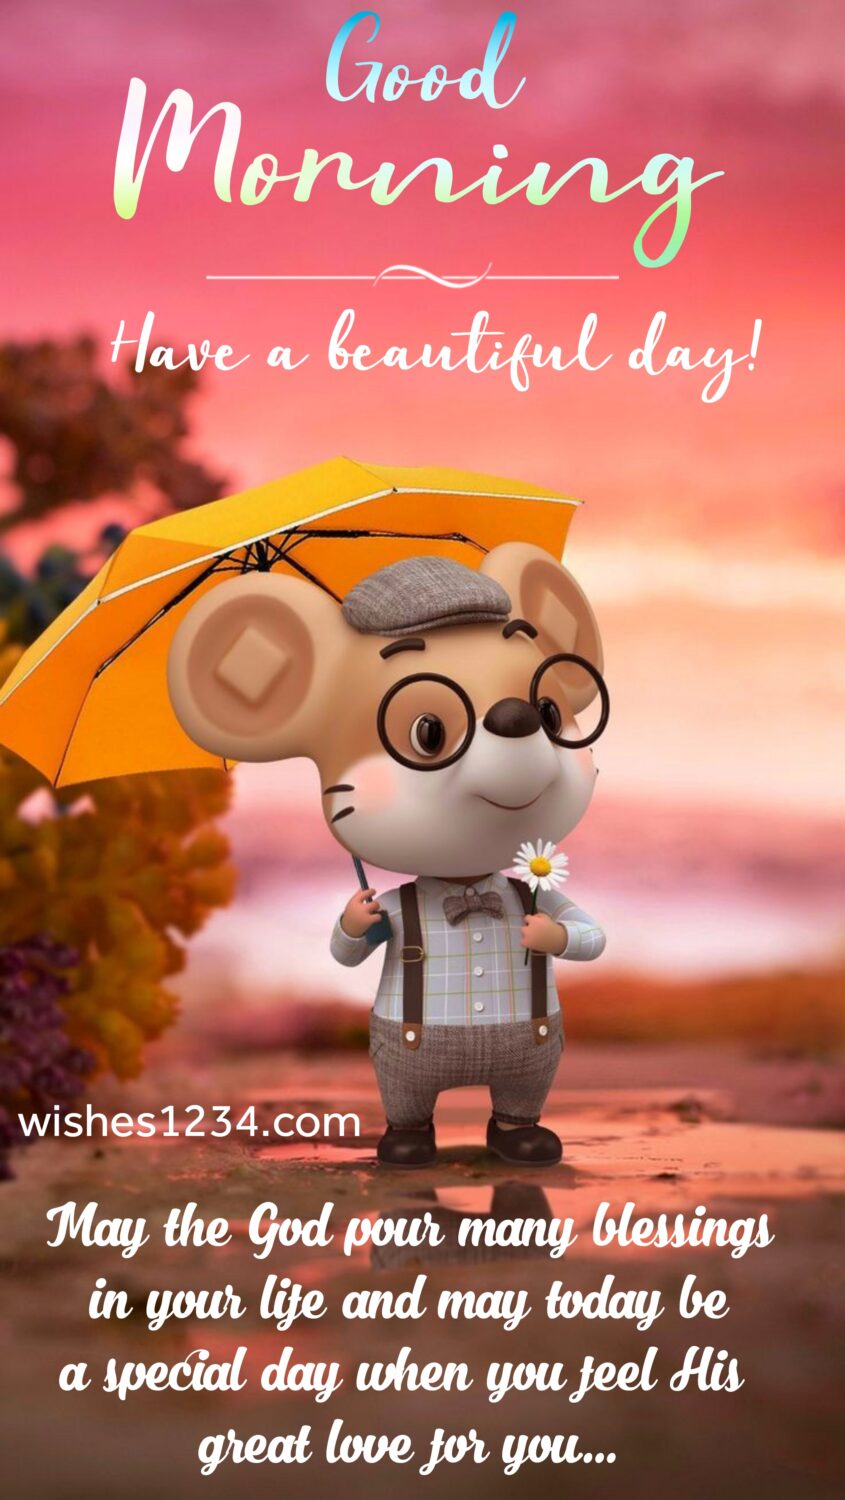 Mouse cartoon with yellow umbrella and daisy flower in hand, Happy Saturday | Saturday Greetings.